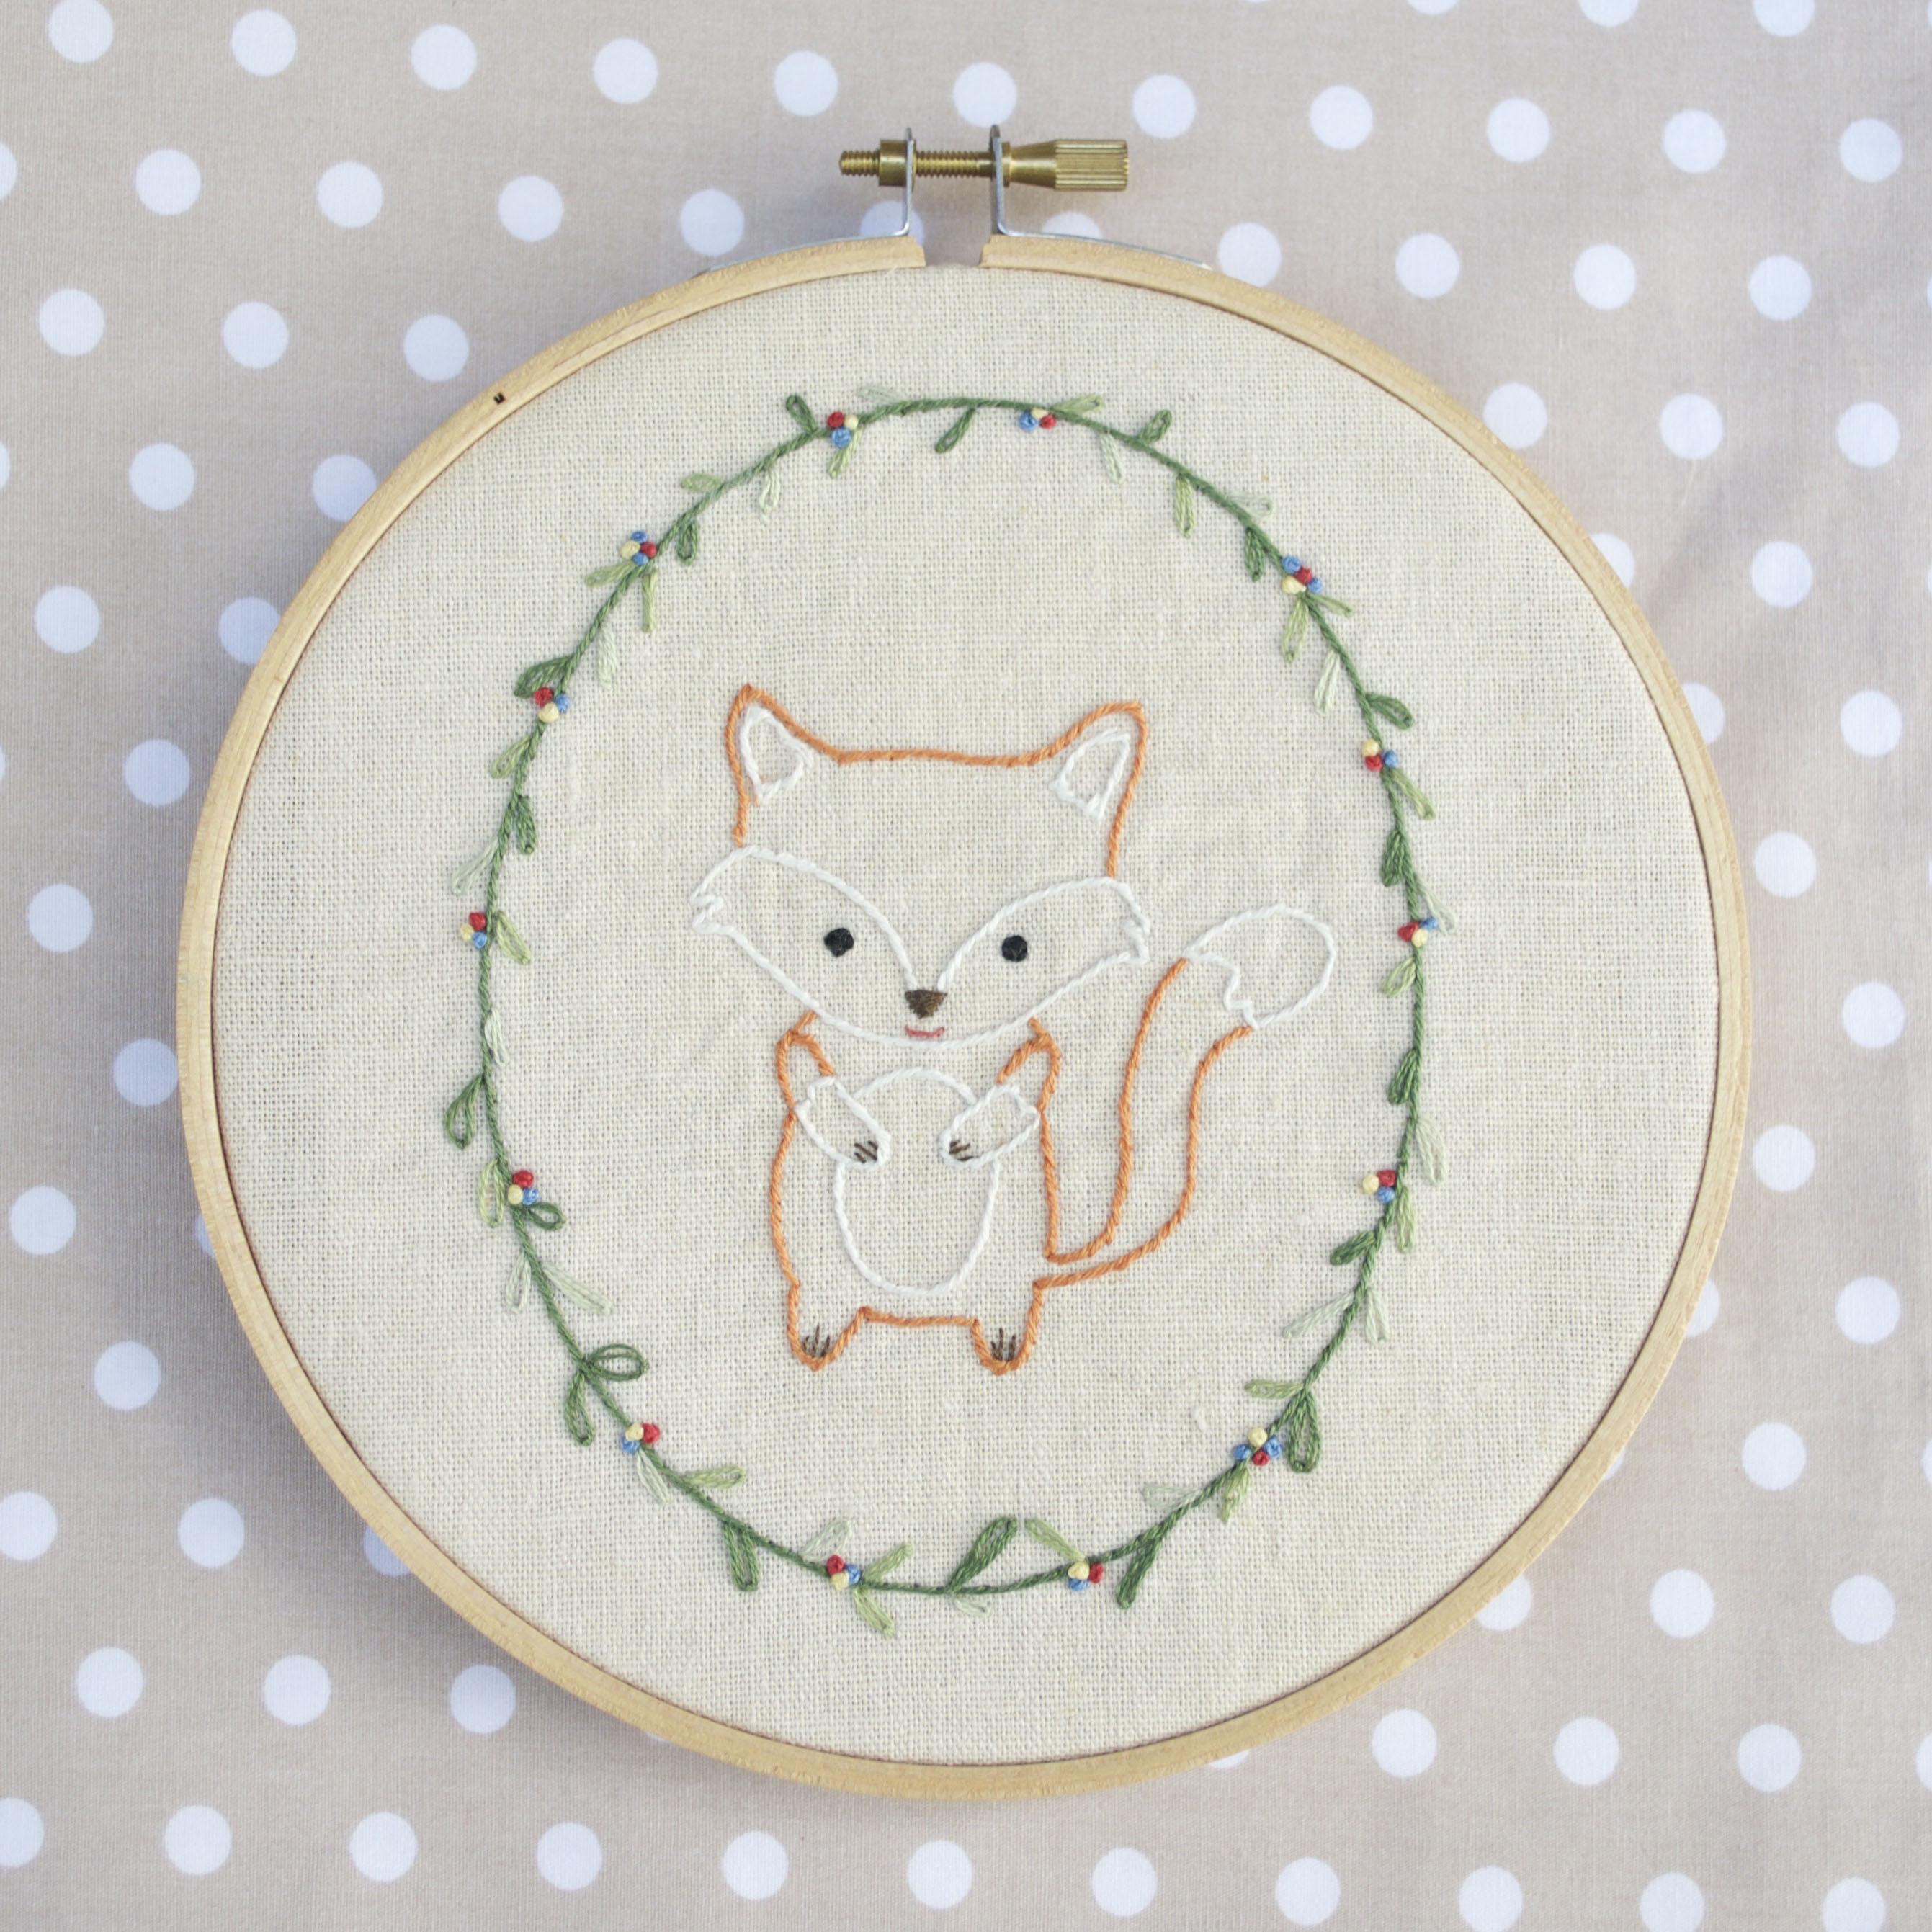 Embroidery Patterns Pdf Little Fox Hand Embroidery Pdf Pattern Instructions